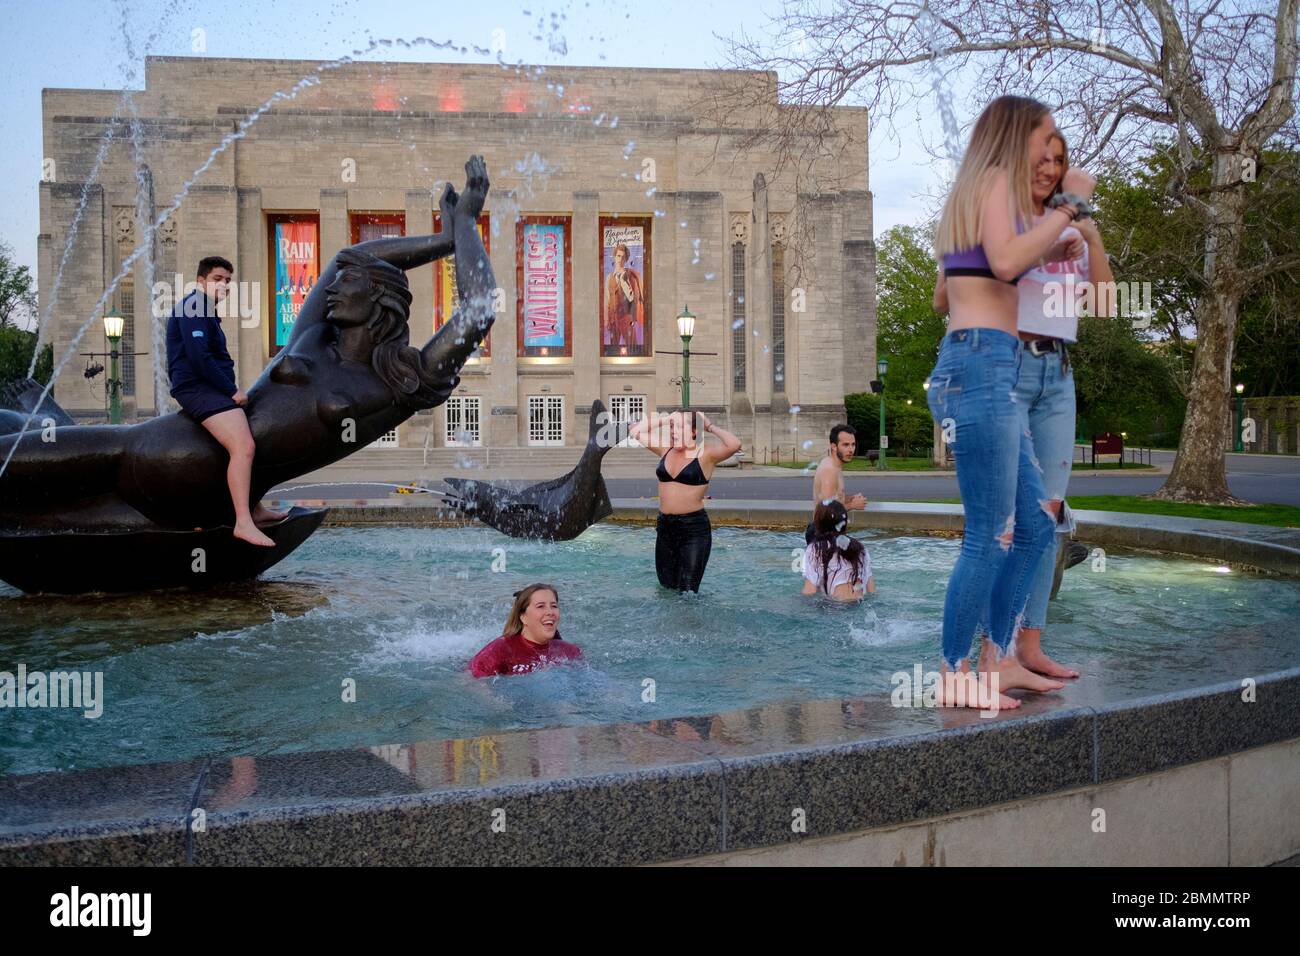 Bloomington, United States. 09th May, 2020. A group of Indiana University students who just finished graduating from the Kelley School of business during a video ceremony this weekend celebrate afterwards by jumping into waters of the Show-alter Fountain and posing for photographs.Classes at IU were taught virtually since spring break due to the COVID-19/Coronavirus pandemic, and in person classes were cancelled and the in person annual graduation ceremony was also cancelled. Credit: SOPA Images Limited/Alamy Live News Stock Photo